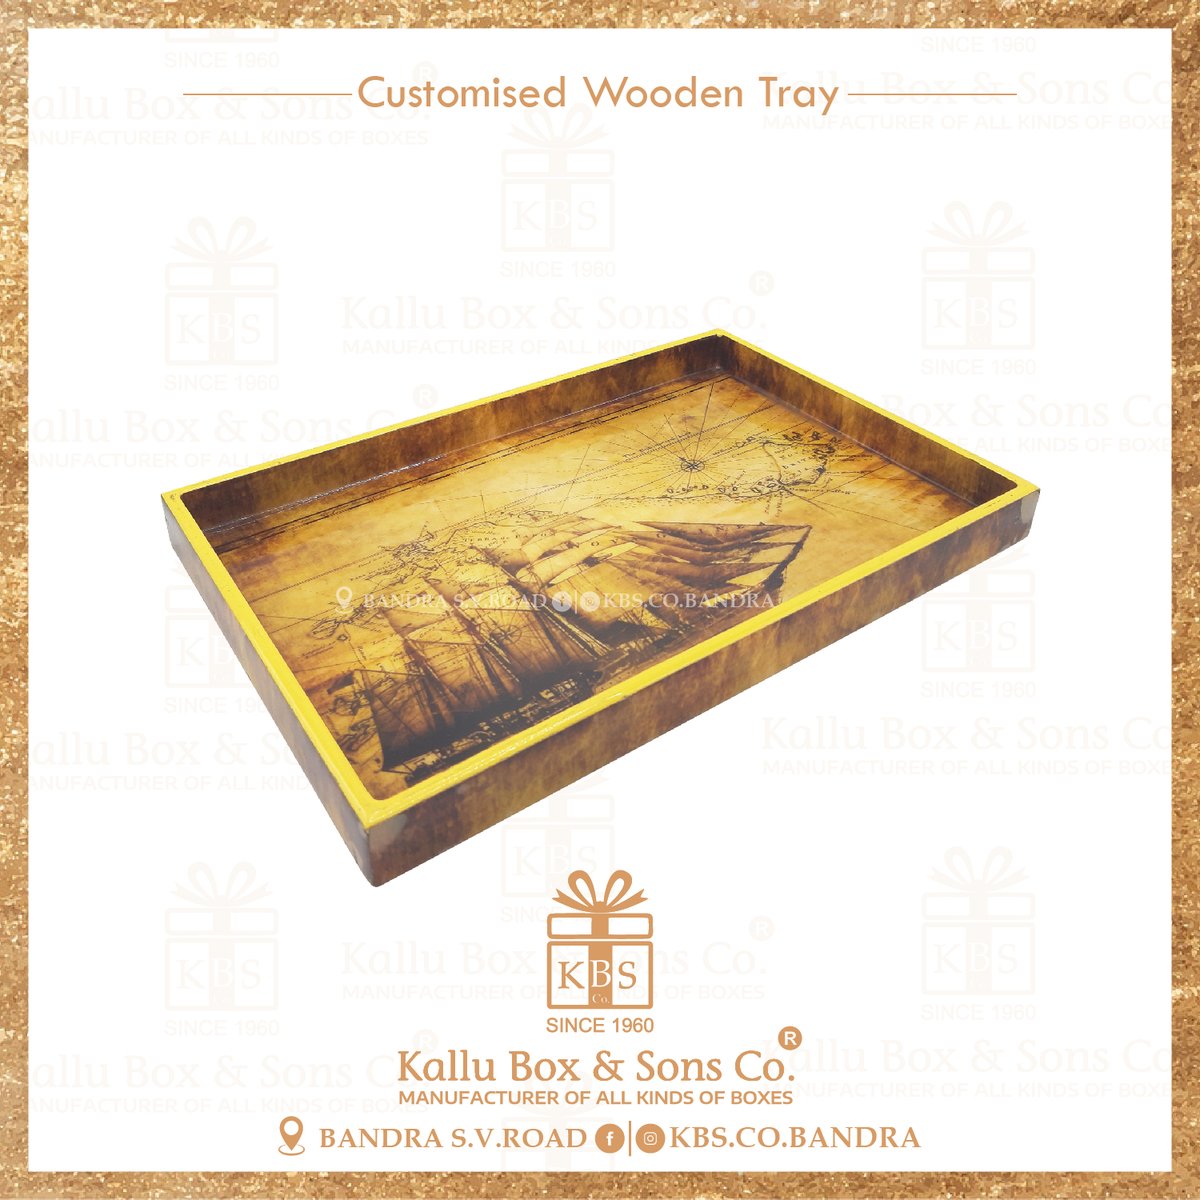 Beautiful Packaging with trays.
.
.
.
#kbs.co.bandra
#woodentrays
#printedtrays
#madeinindia🇮🇳 
#manufaturerofallkindsofboxes .
.
For more inquiry call or text
+91 9867687208
+91 9820553320.